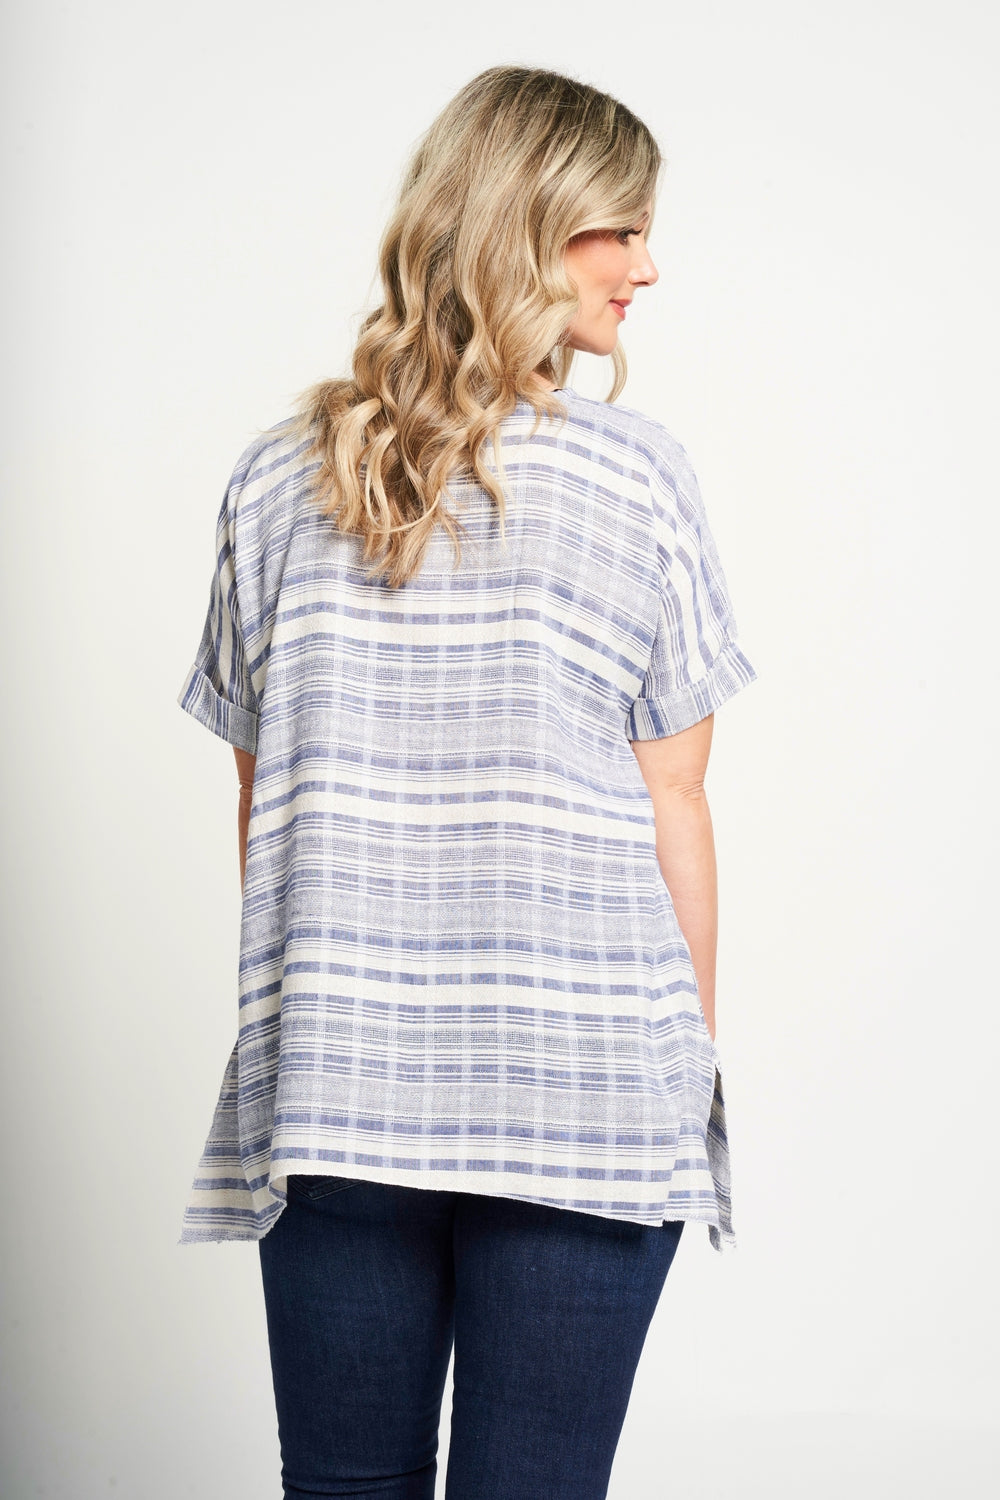 Saloos Drop Shoulder Panelled Top with Necklace